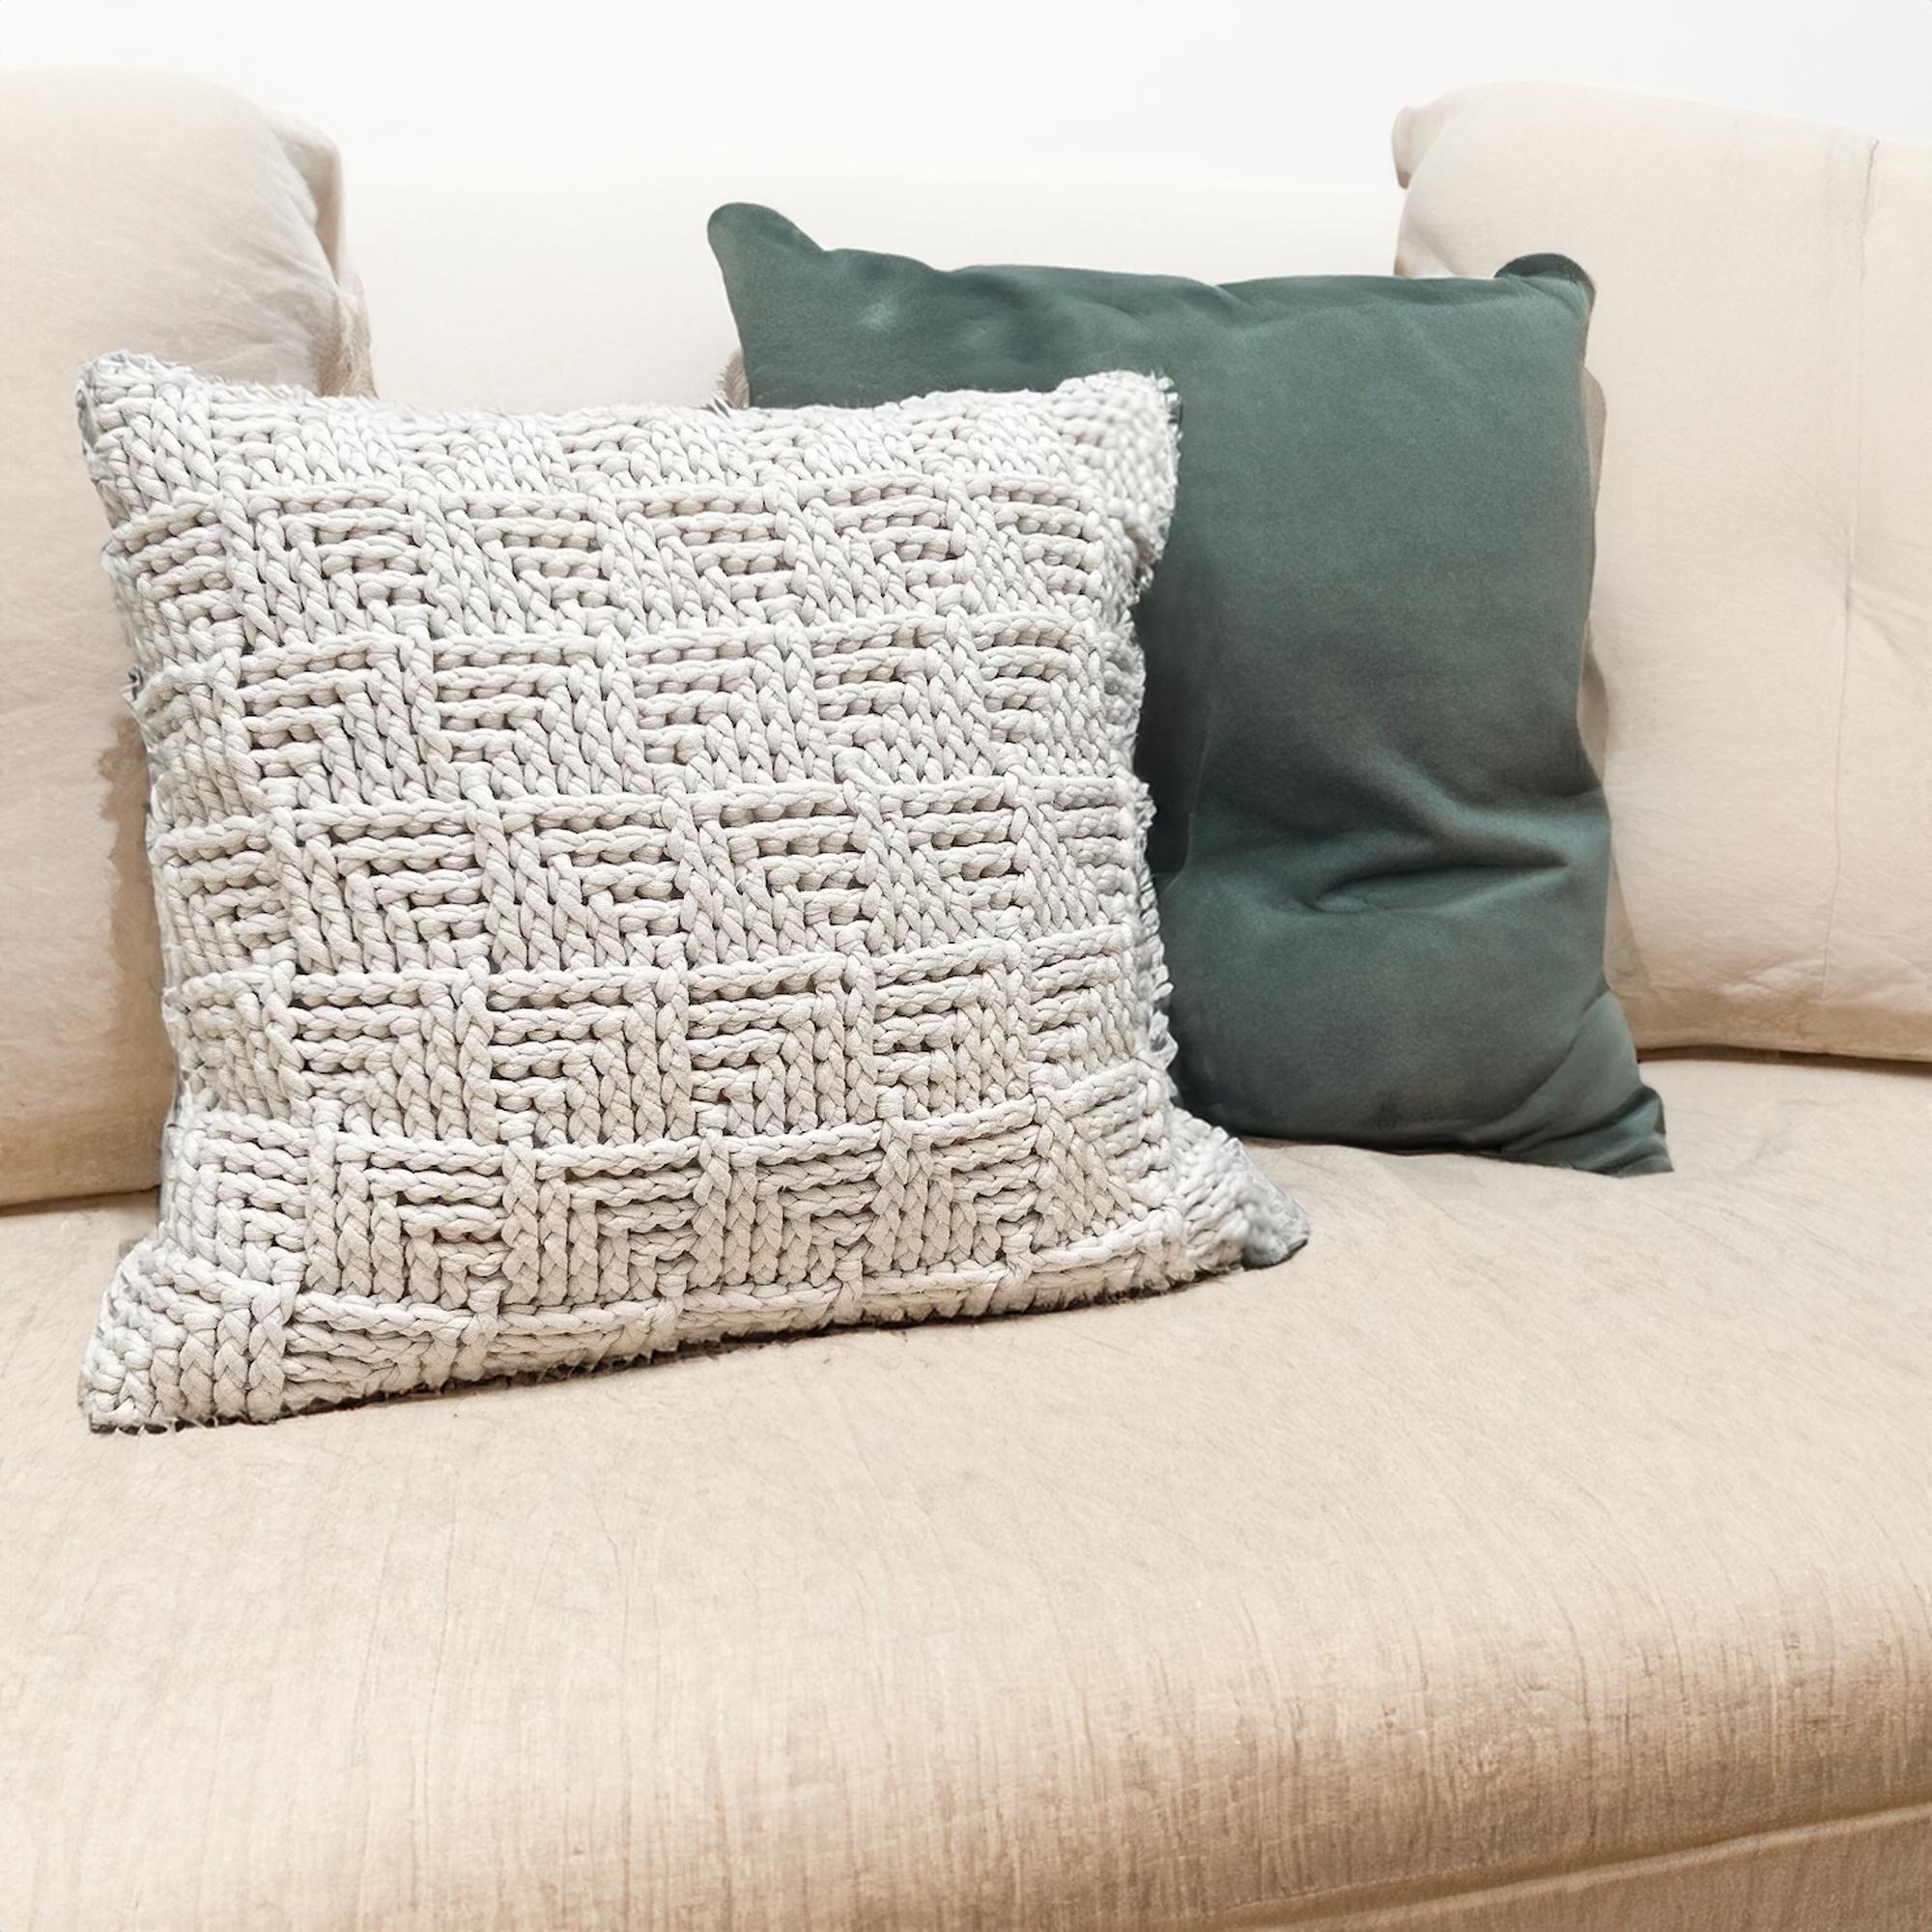 Soft Basketweave Dream Pillow Cover